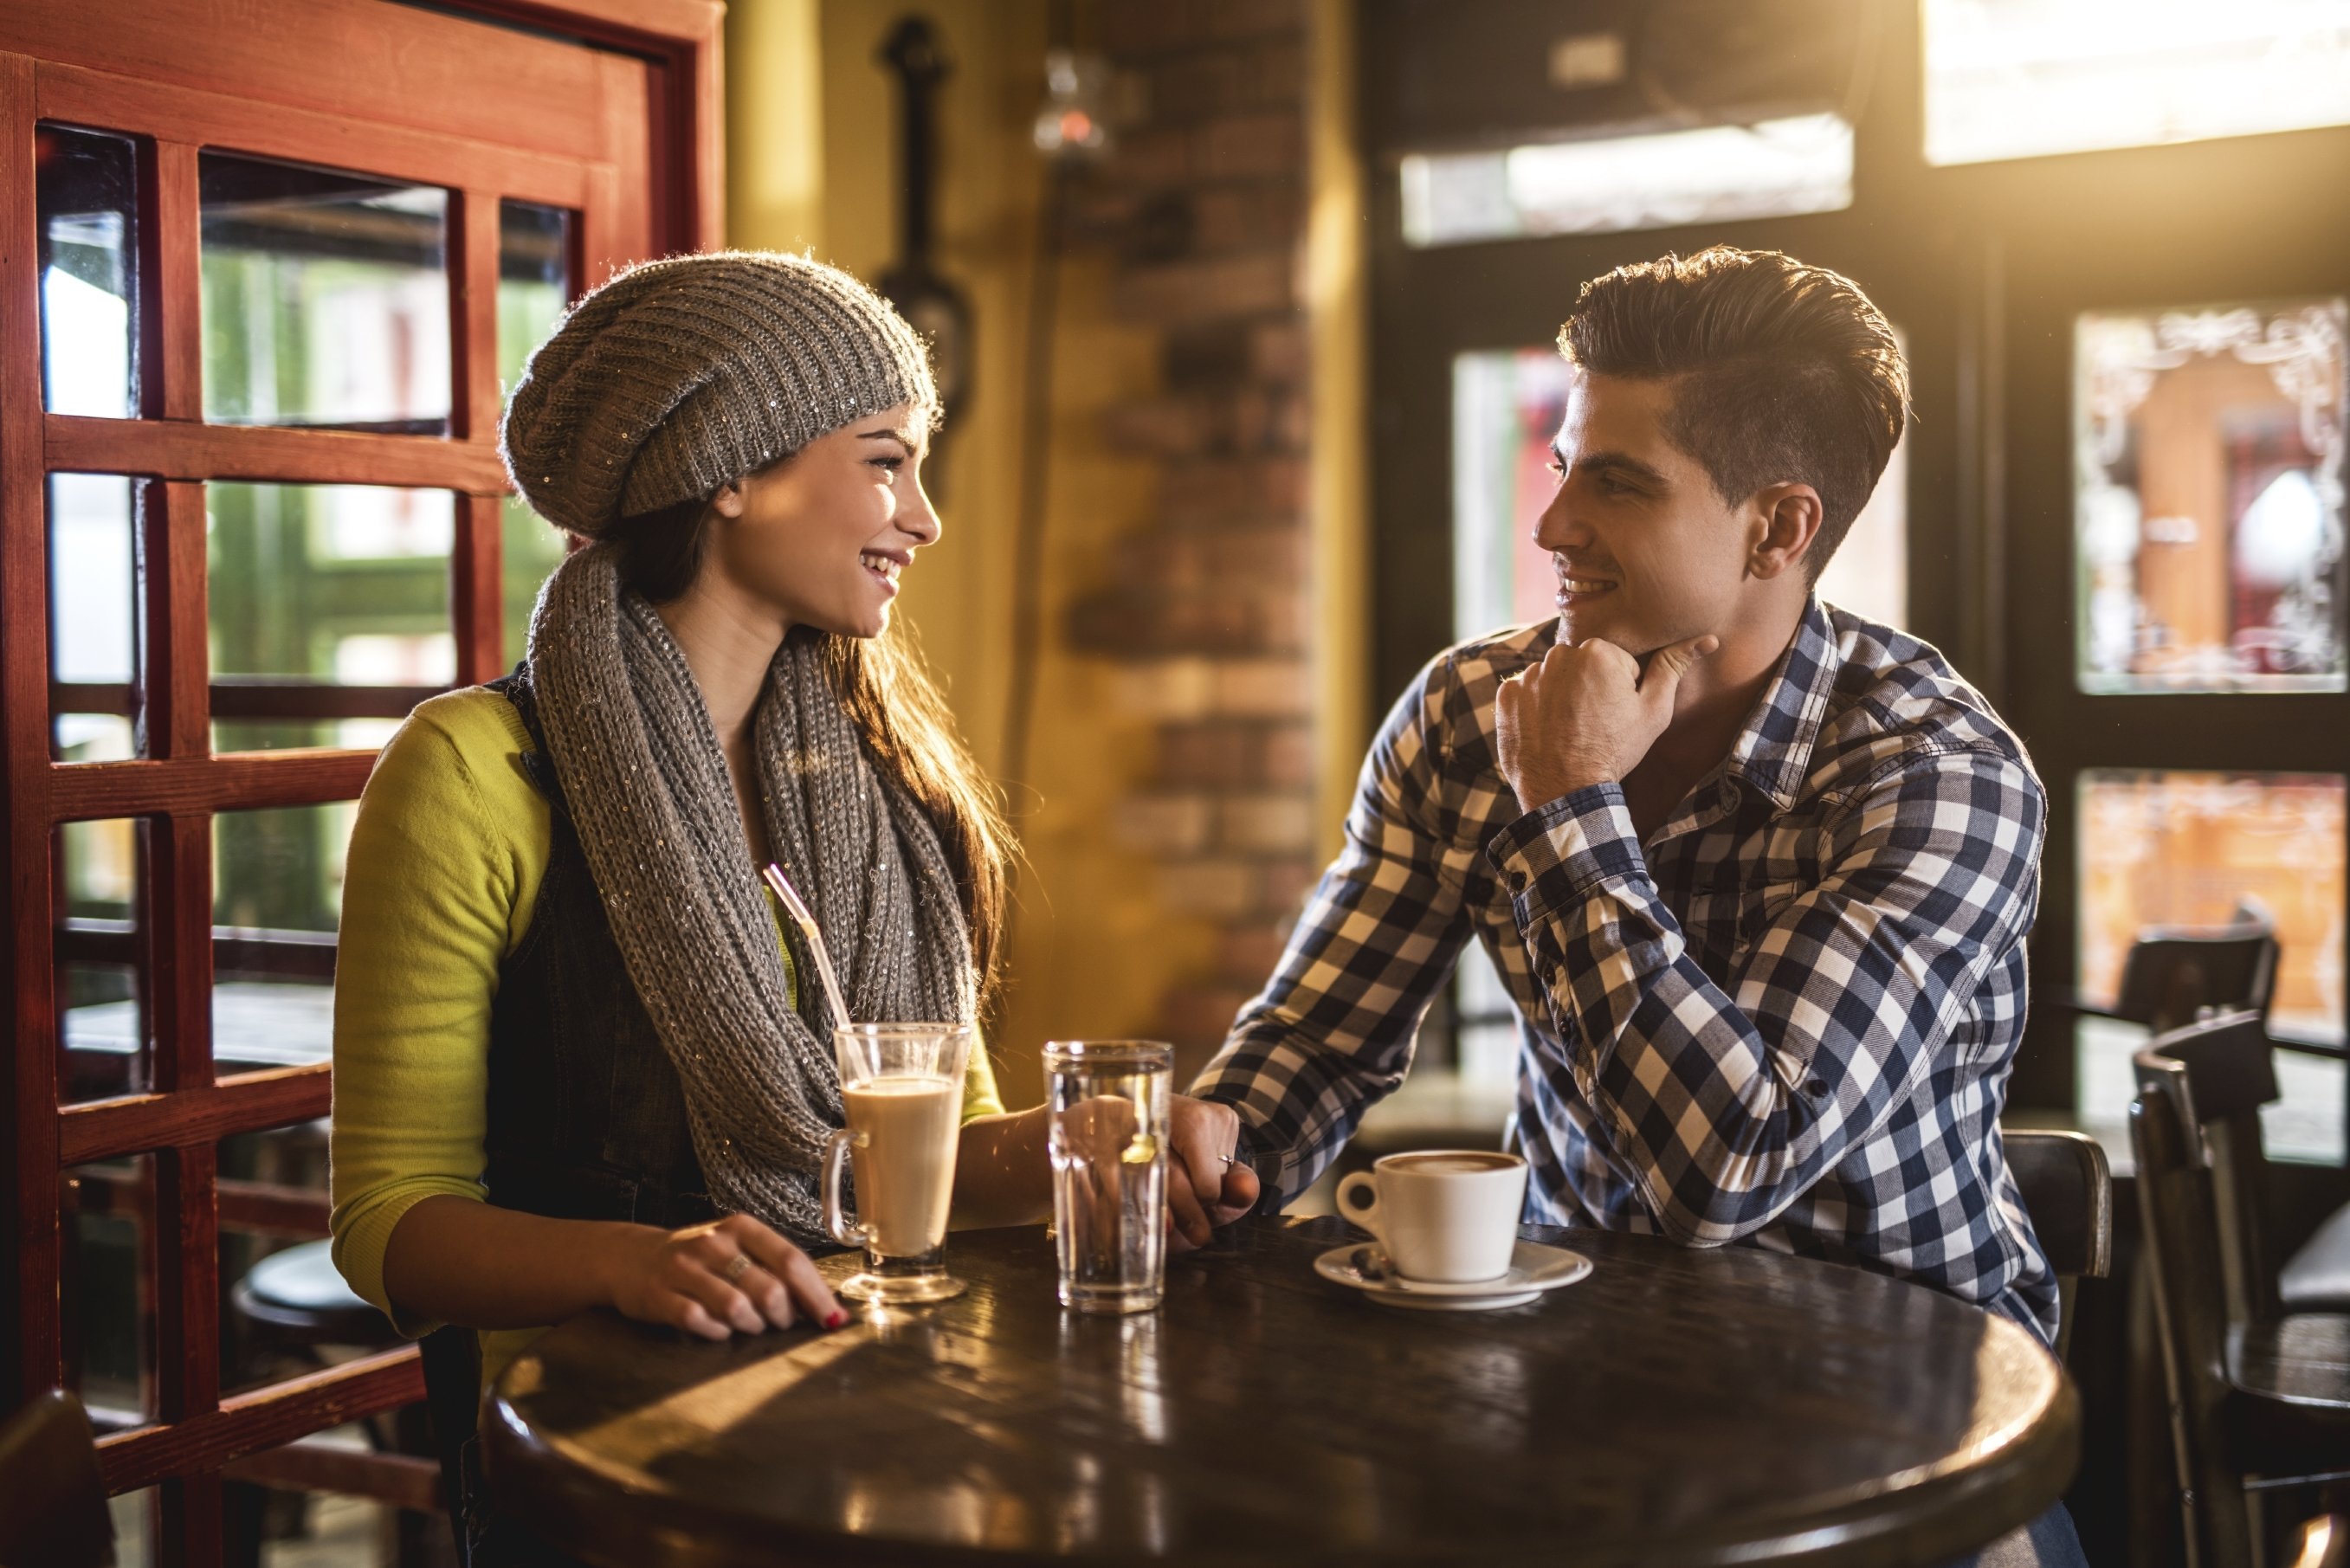 10 Lovable First Date Ideas For Men conversation starters worst topics for a first date greatist 2022